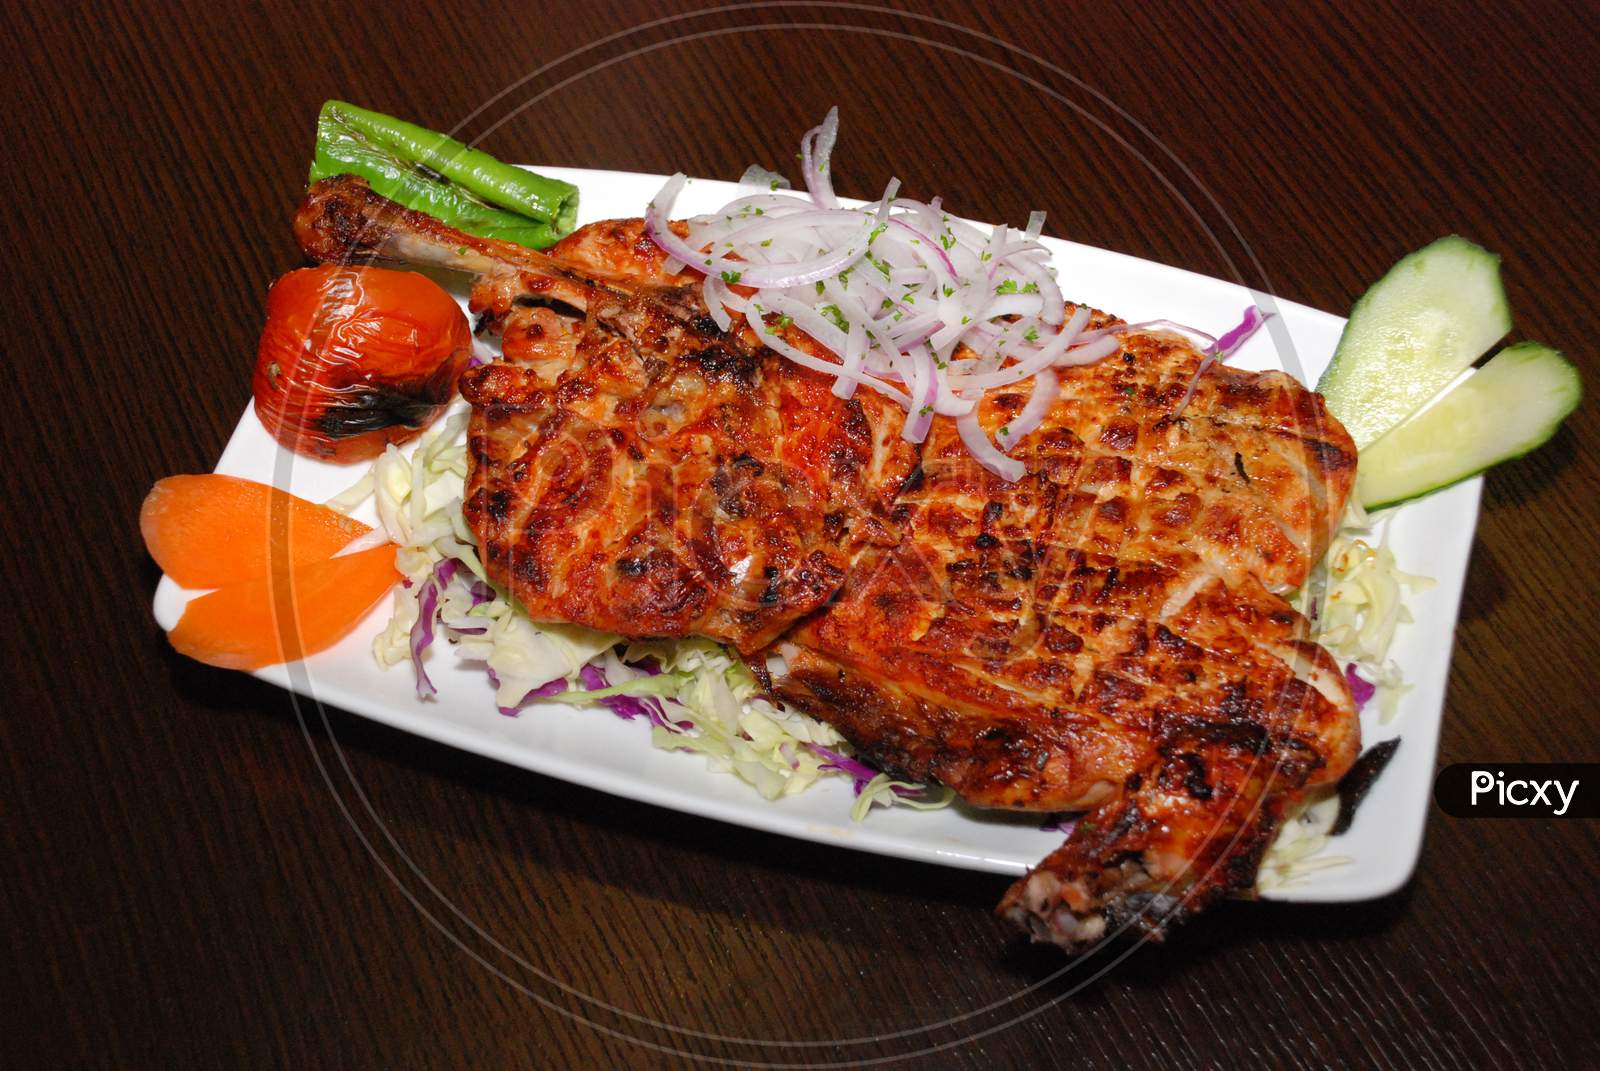 Grilled Half A Chicken On The Plate With Onion And Vegetables